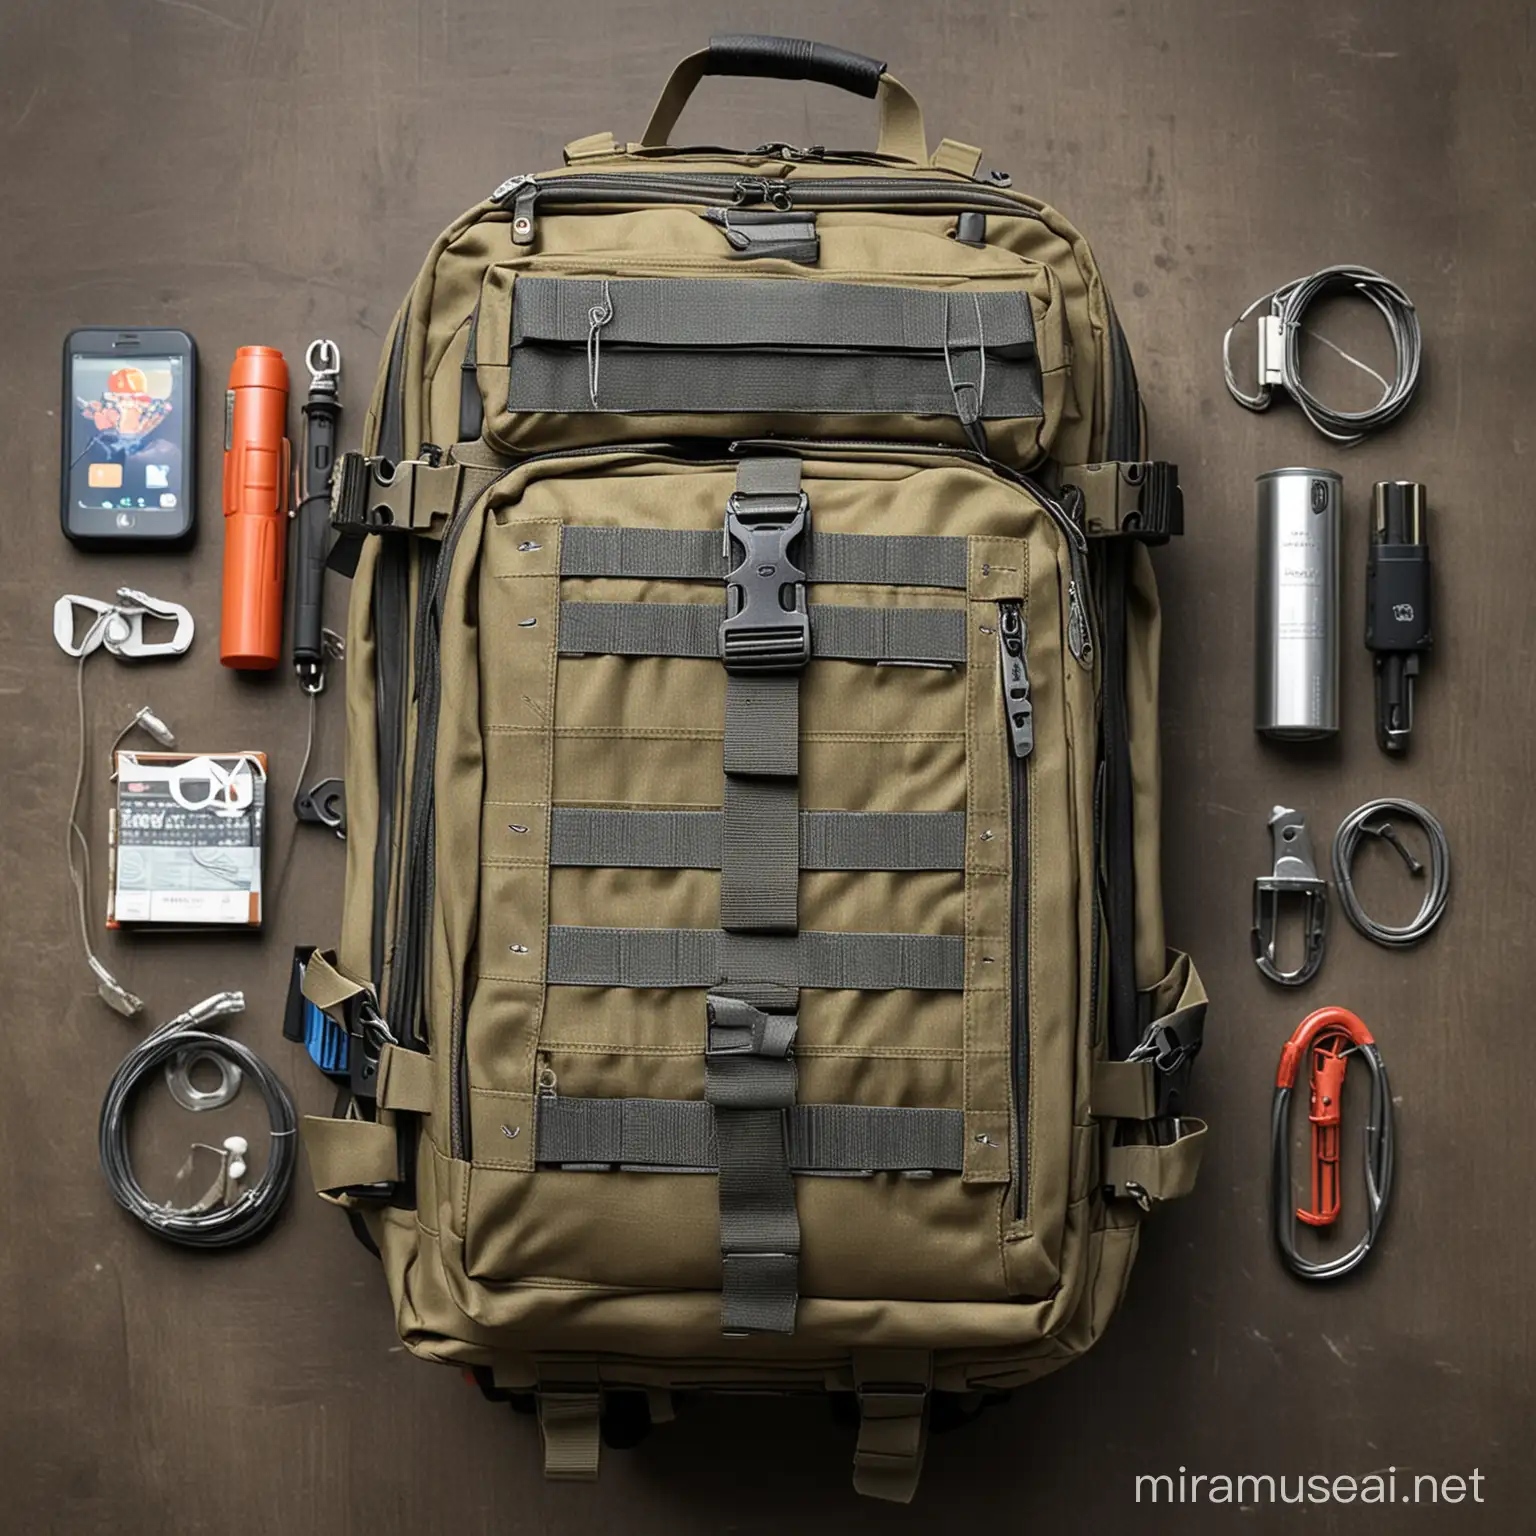 Survival backpack with widgets
